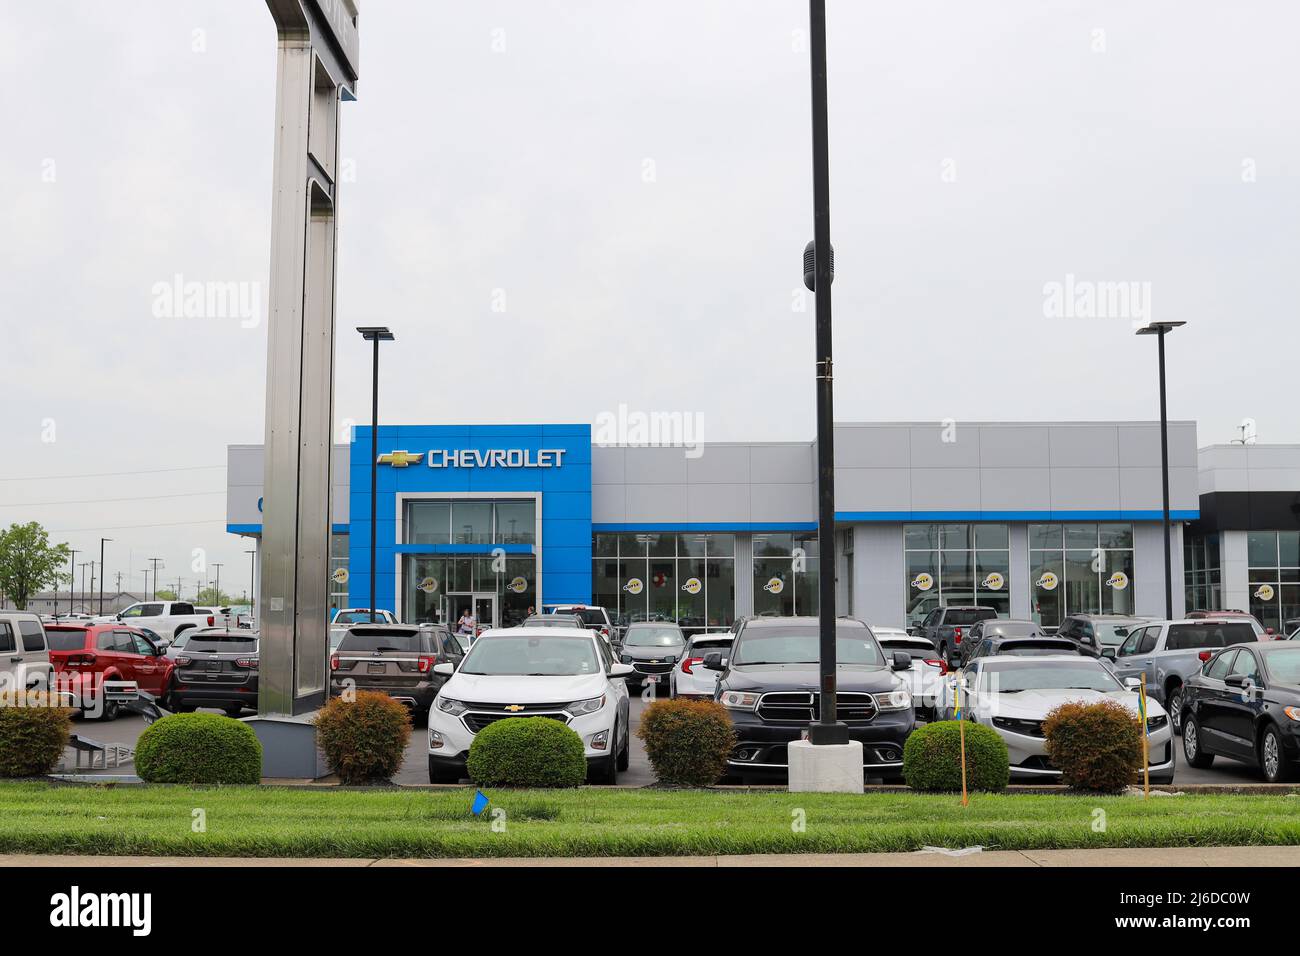 Clarksville, Indiana USA  April 30, 2022: The exterior of a Chevrolet car dealership  building in Clarksville,  Indiana Stock Photo